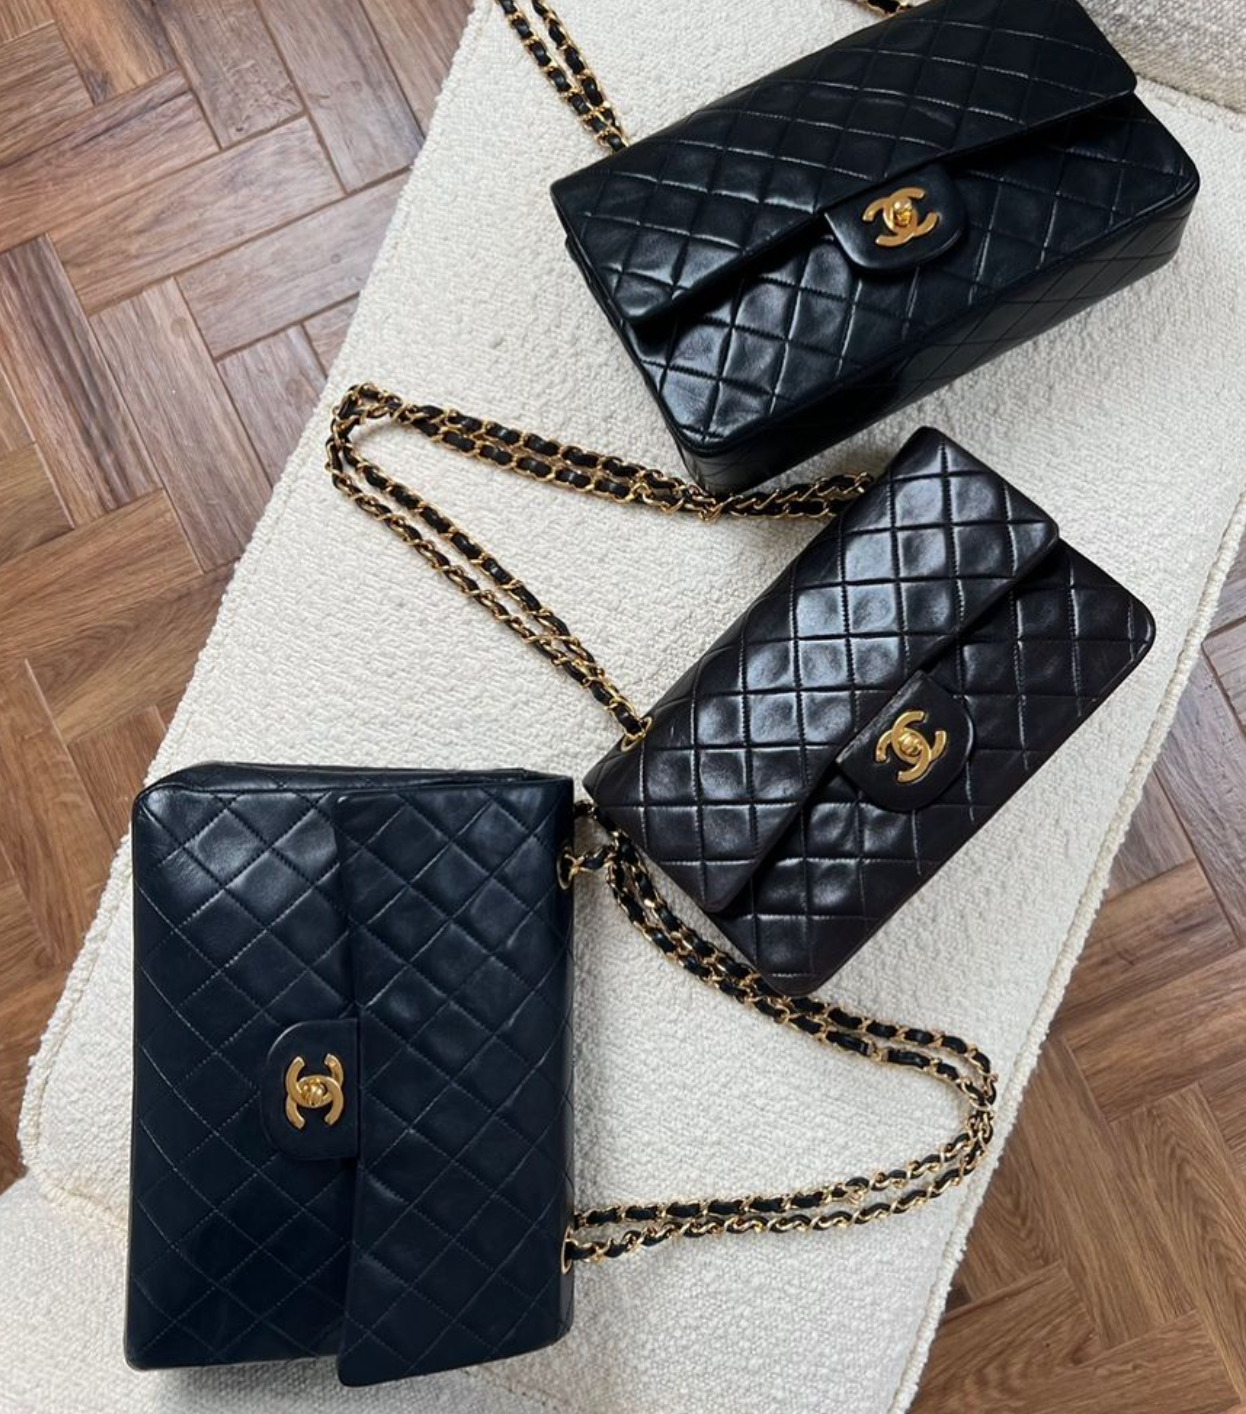 Is a Chanel Classic Flap Bag a good investment?